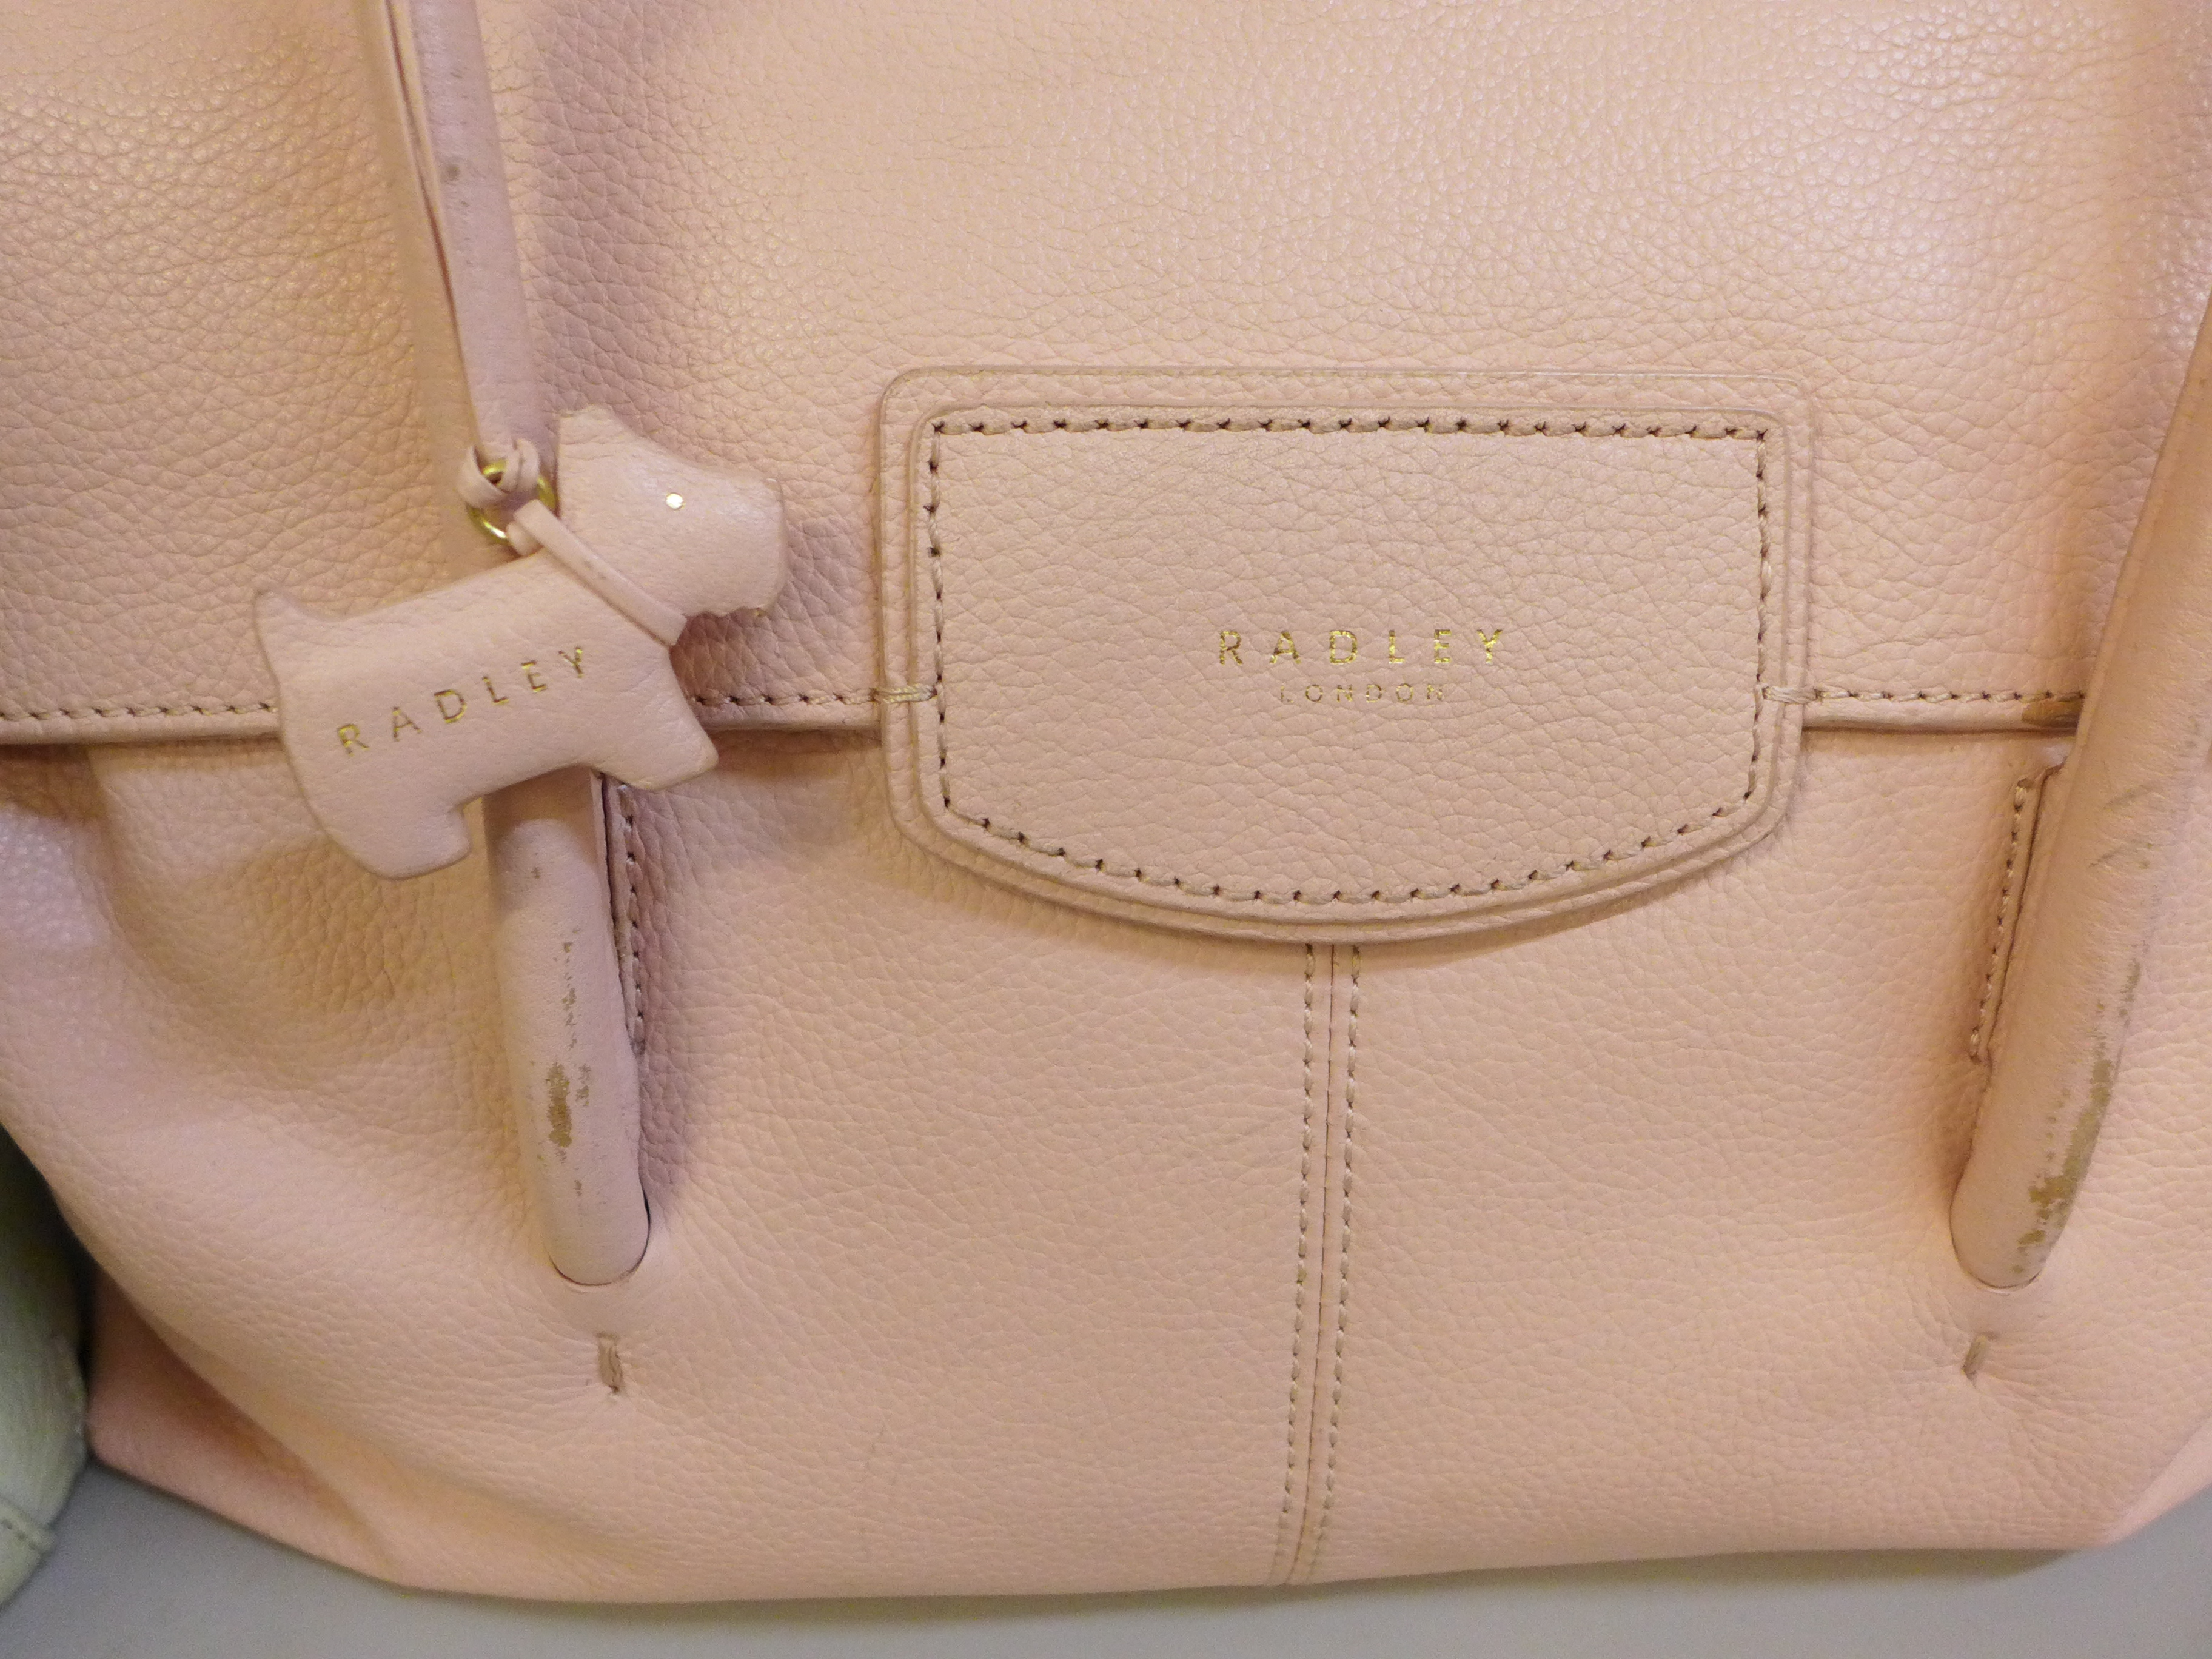 Two Radley pink and pistachio handbags, both with dust bags - Image 2 of 5